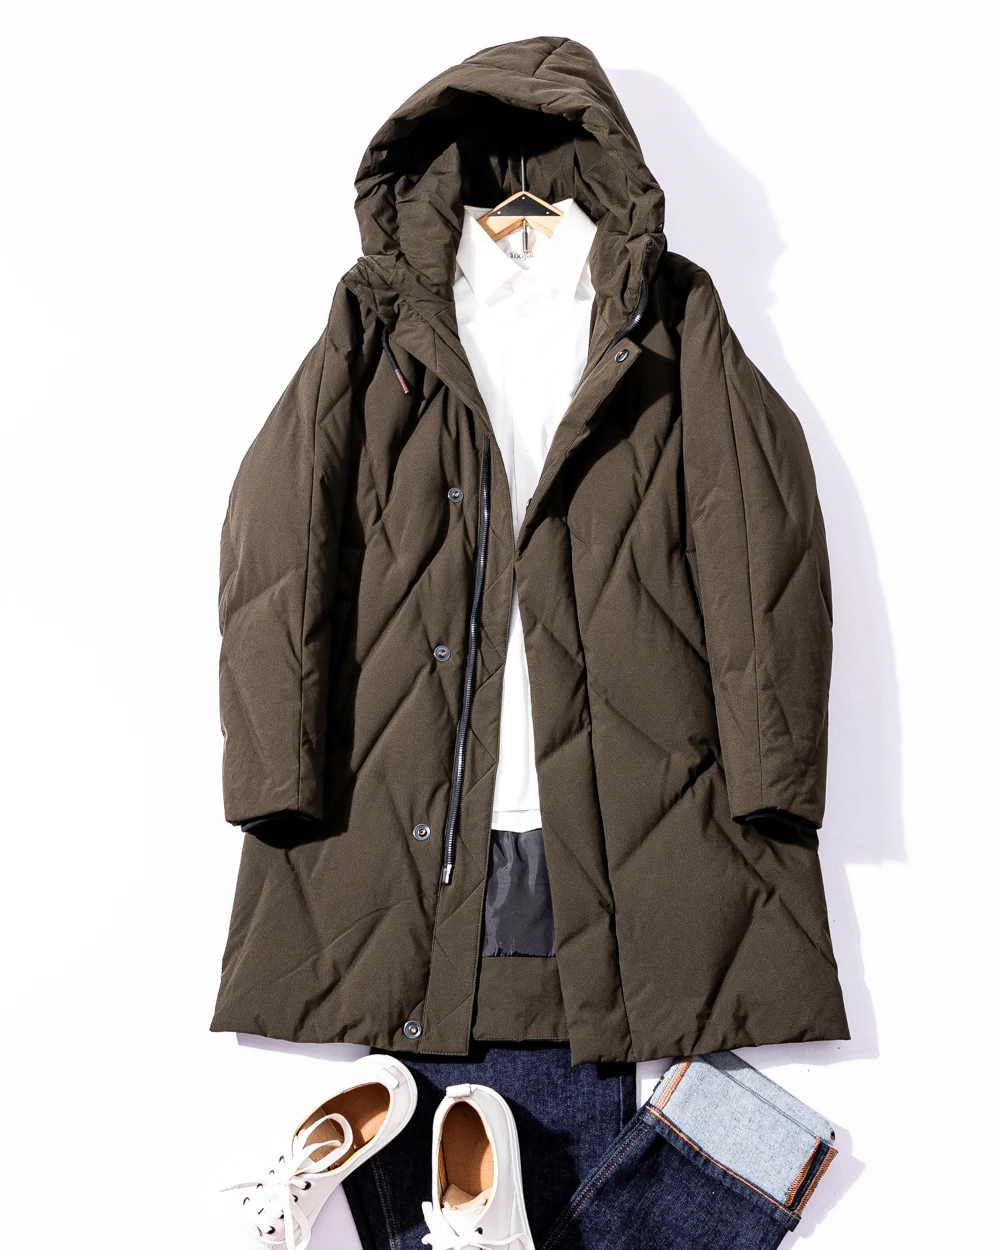 2022 New Fashion Man Duck Down Coat Padded Jacket Warm Parkas for Male Winter Clothing Hooded Outerwear Army Green 2XL 3XL XXXL